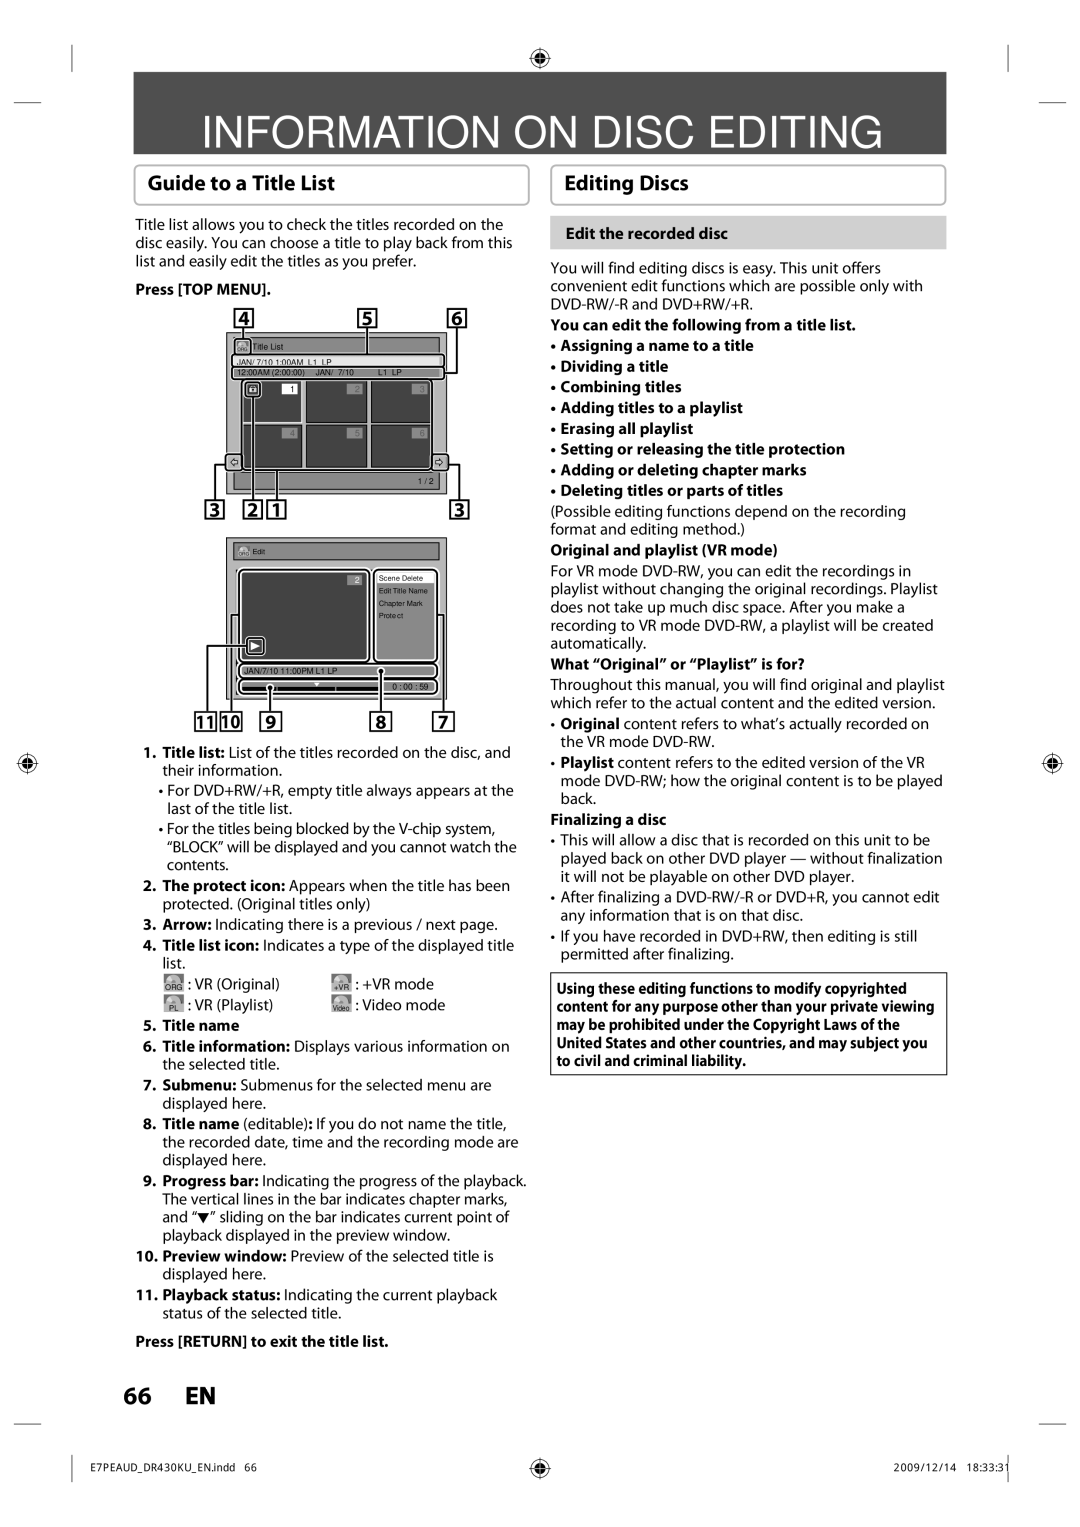 Toshiba DR430 owner manual Information on Disc Editing, Guide to a Title List 